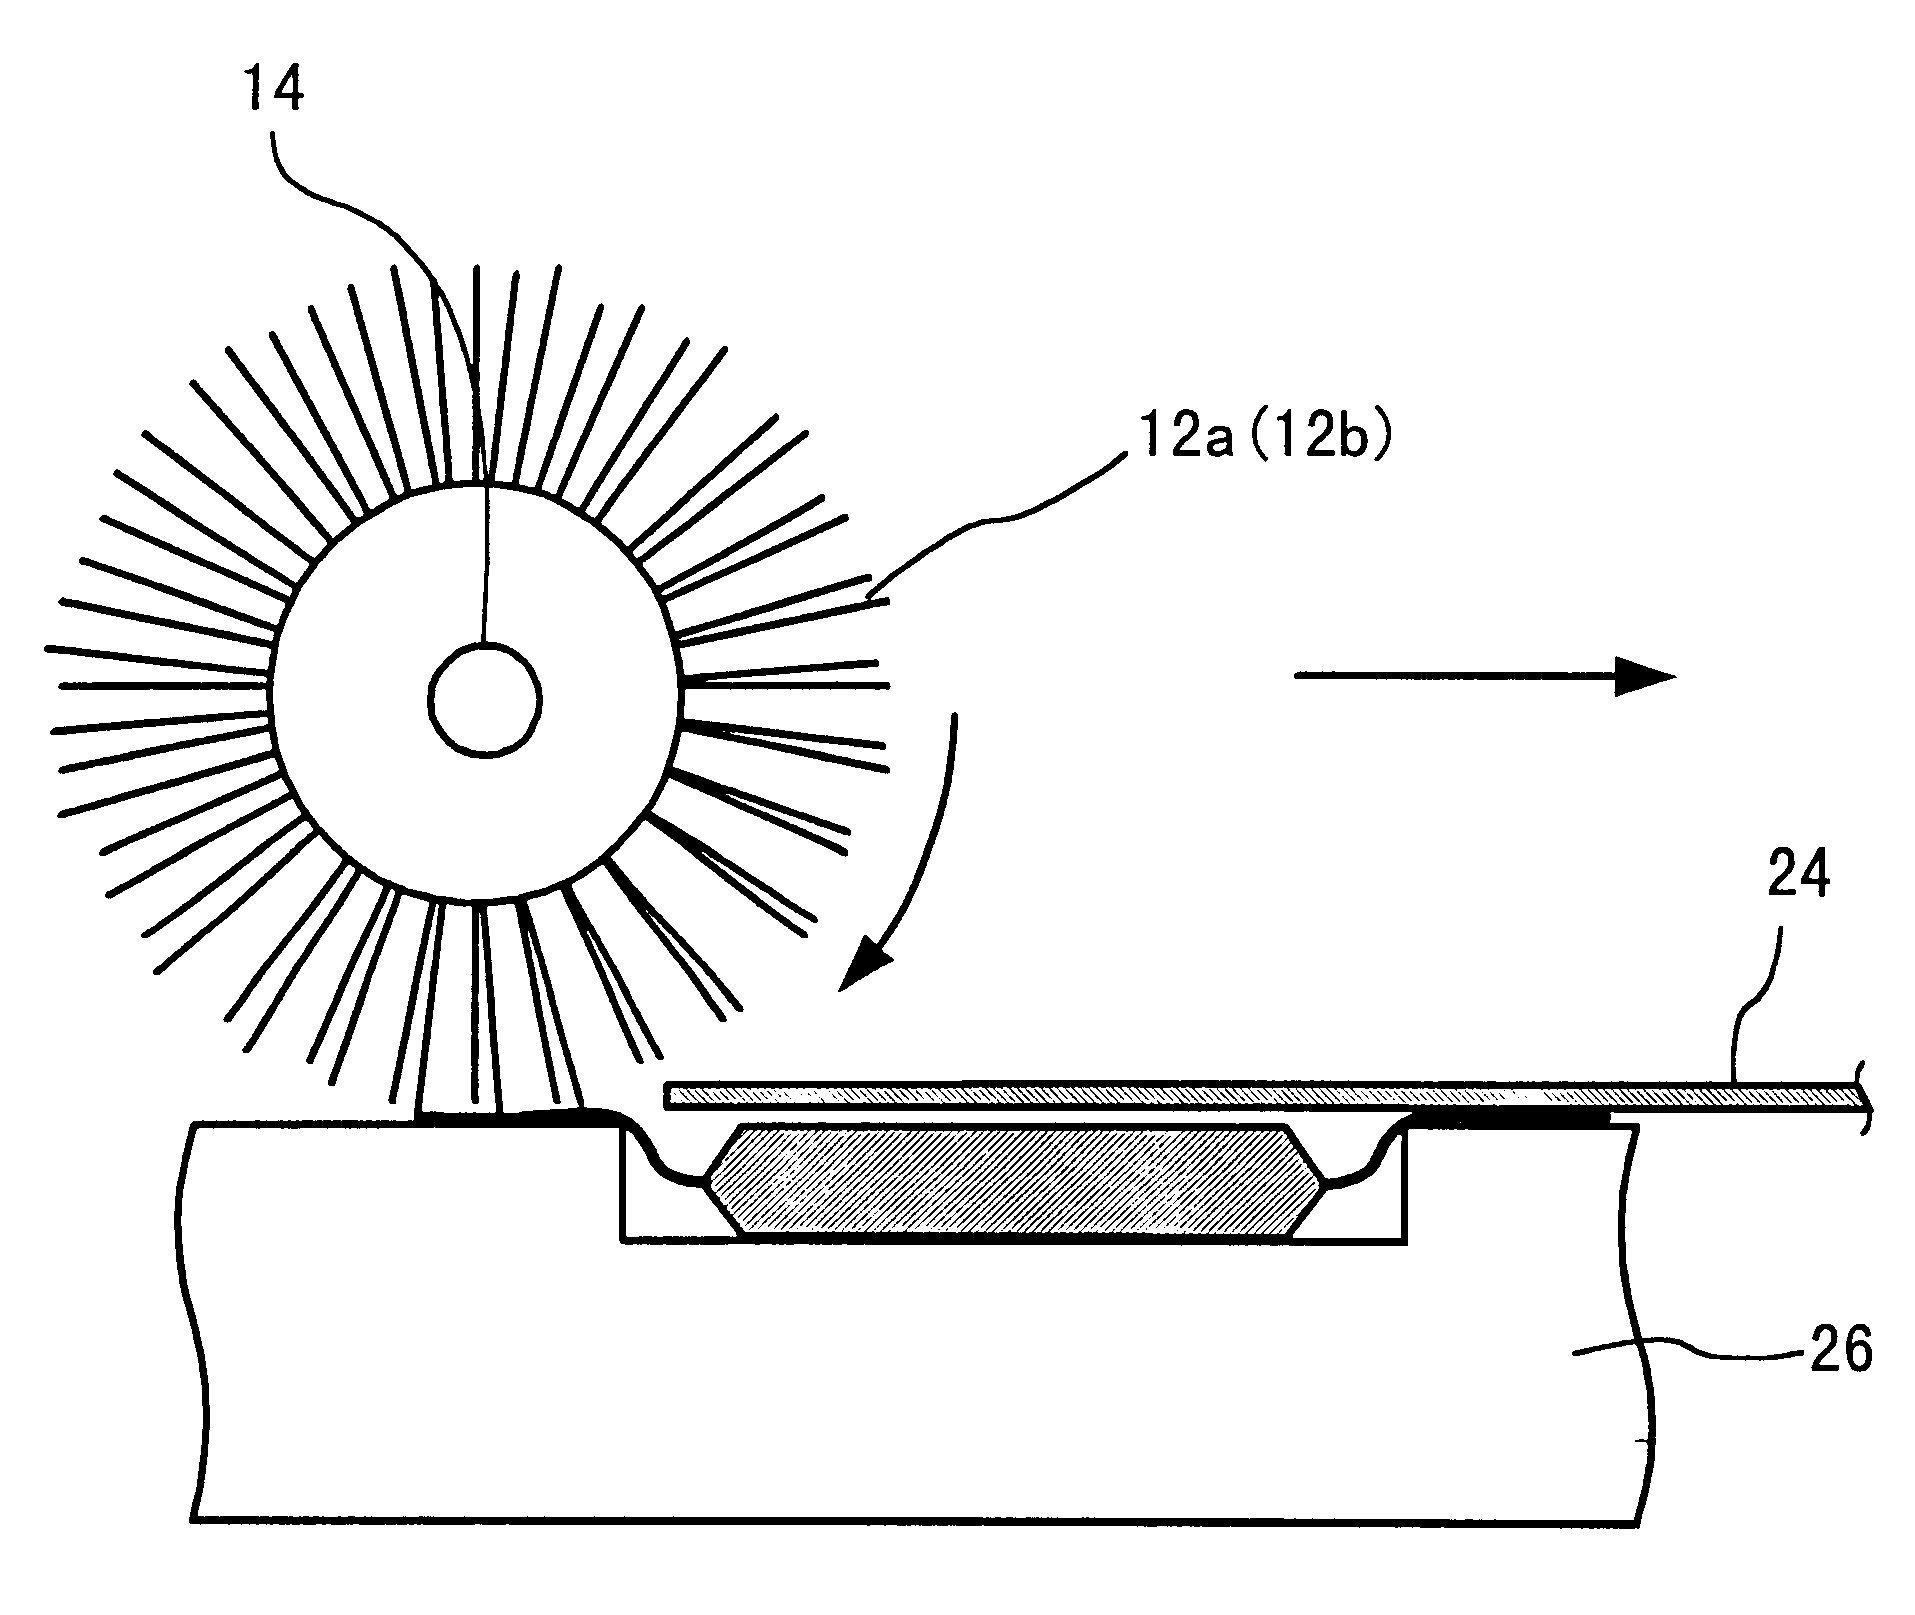 Apparatus for polishing leads of a semiconductor package